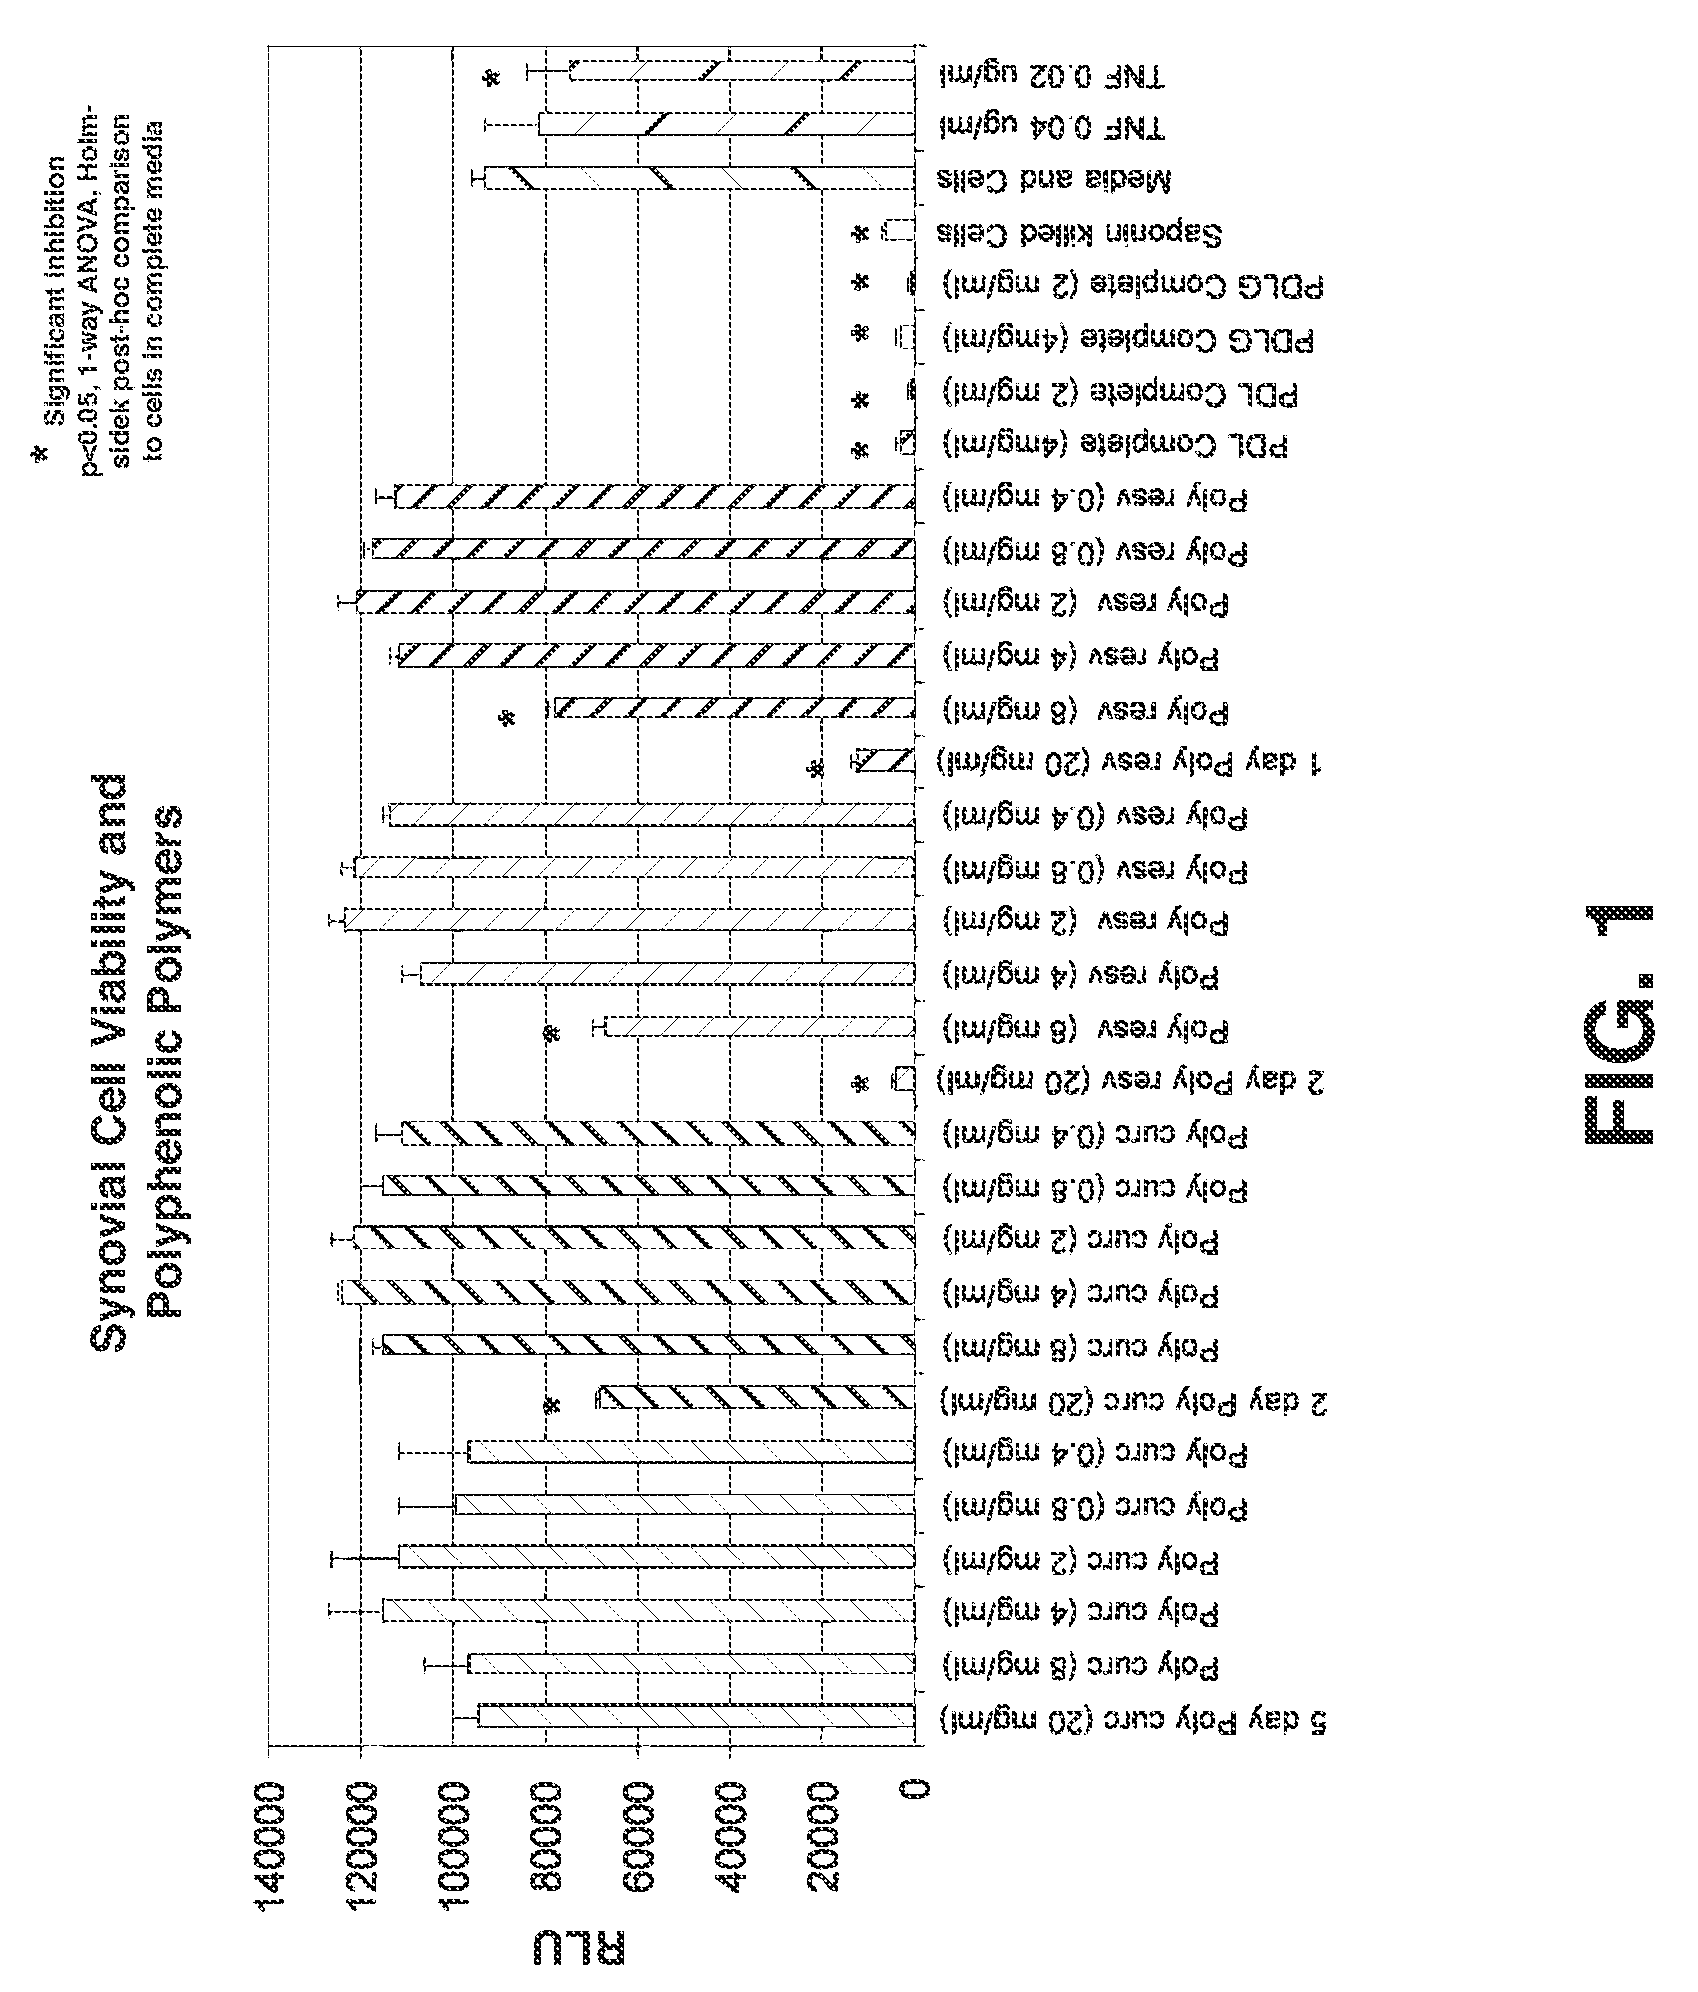 Therapeutic polymers and methods of generation